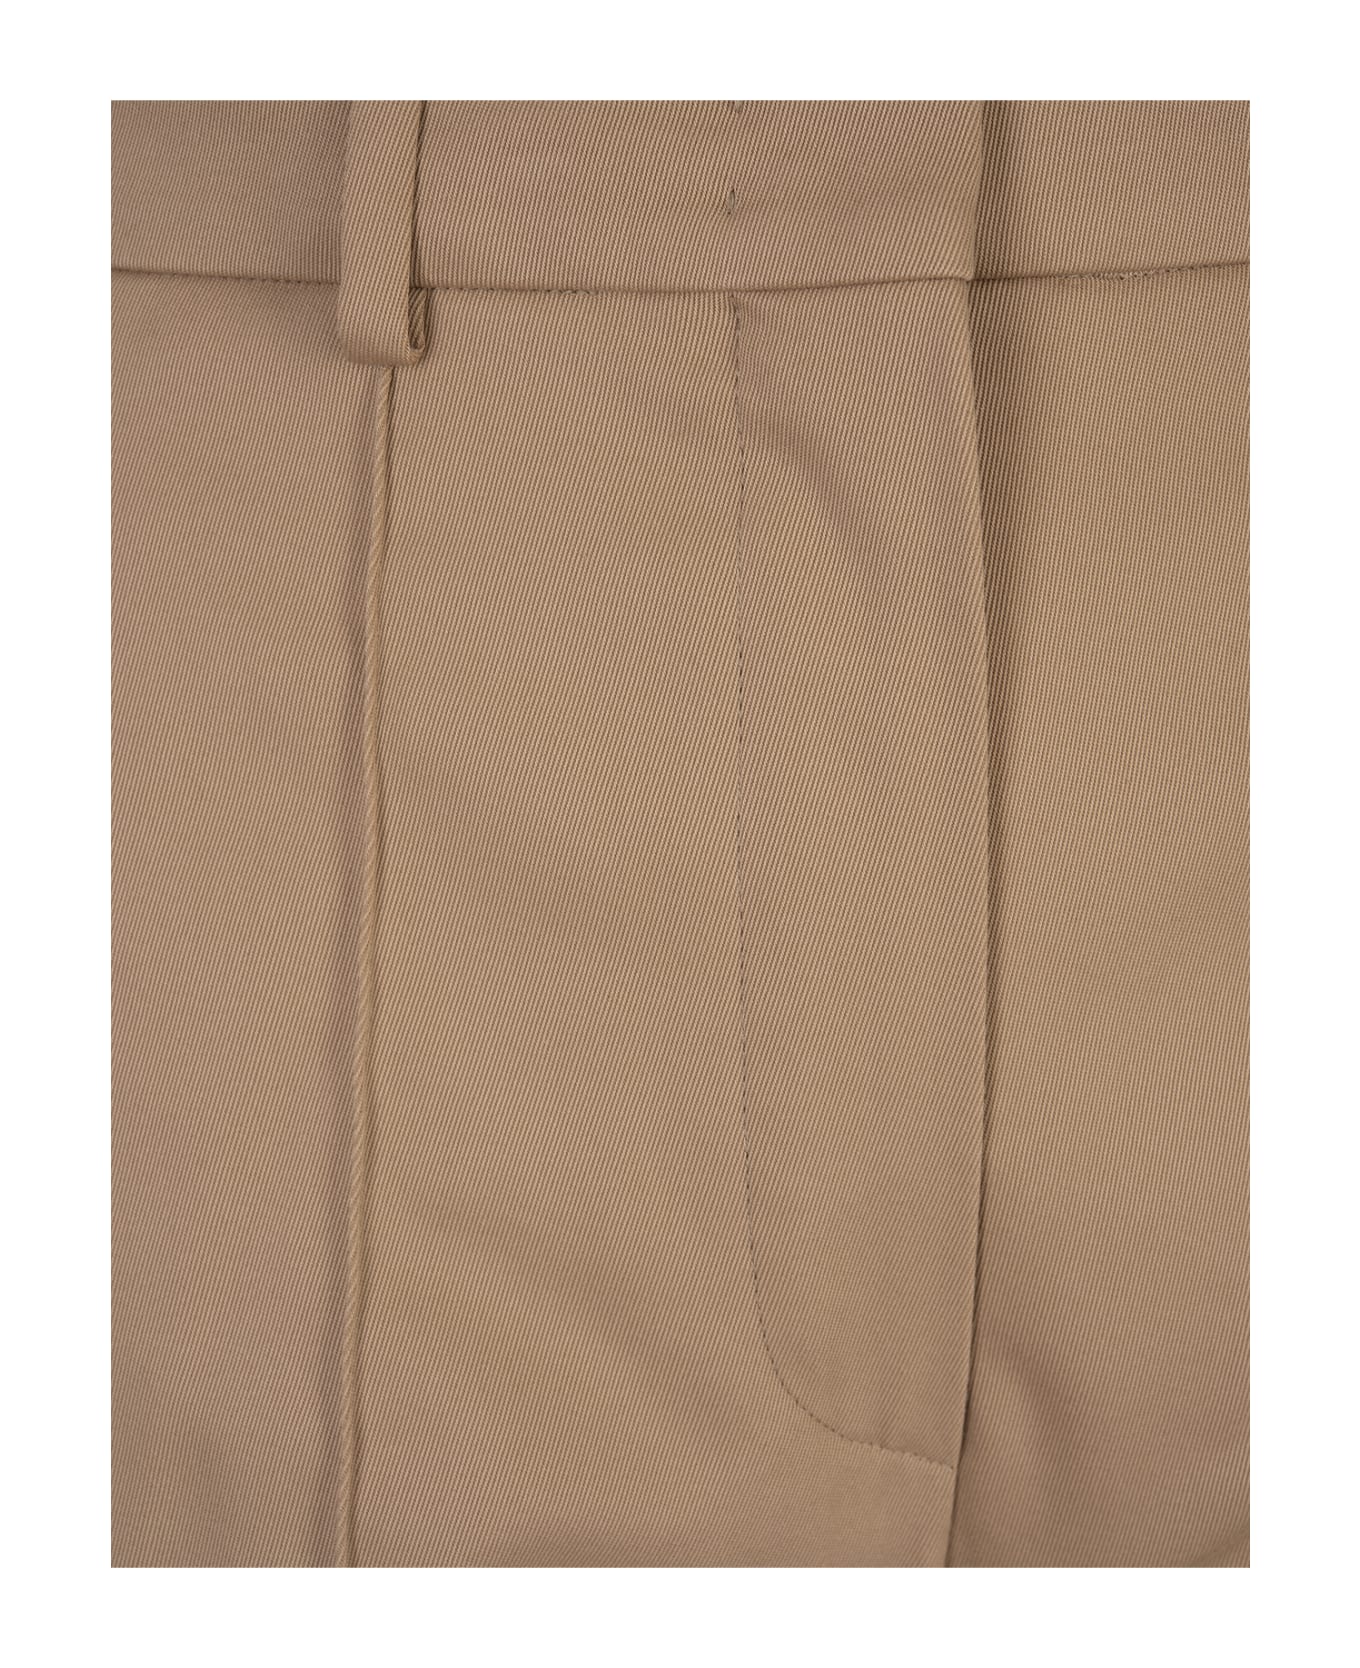 SportMax Beige Norcia Trousers - Brown ボトムス